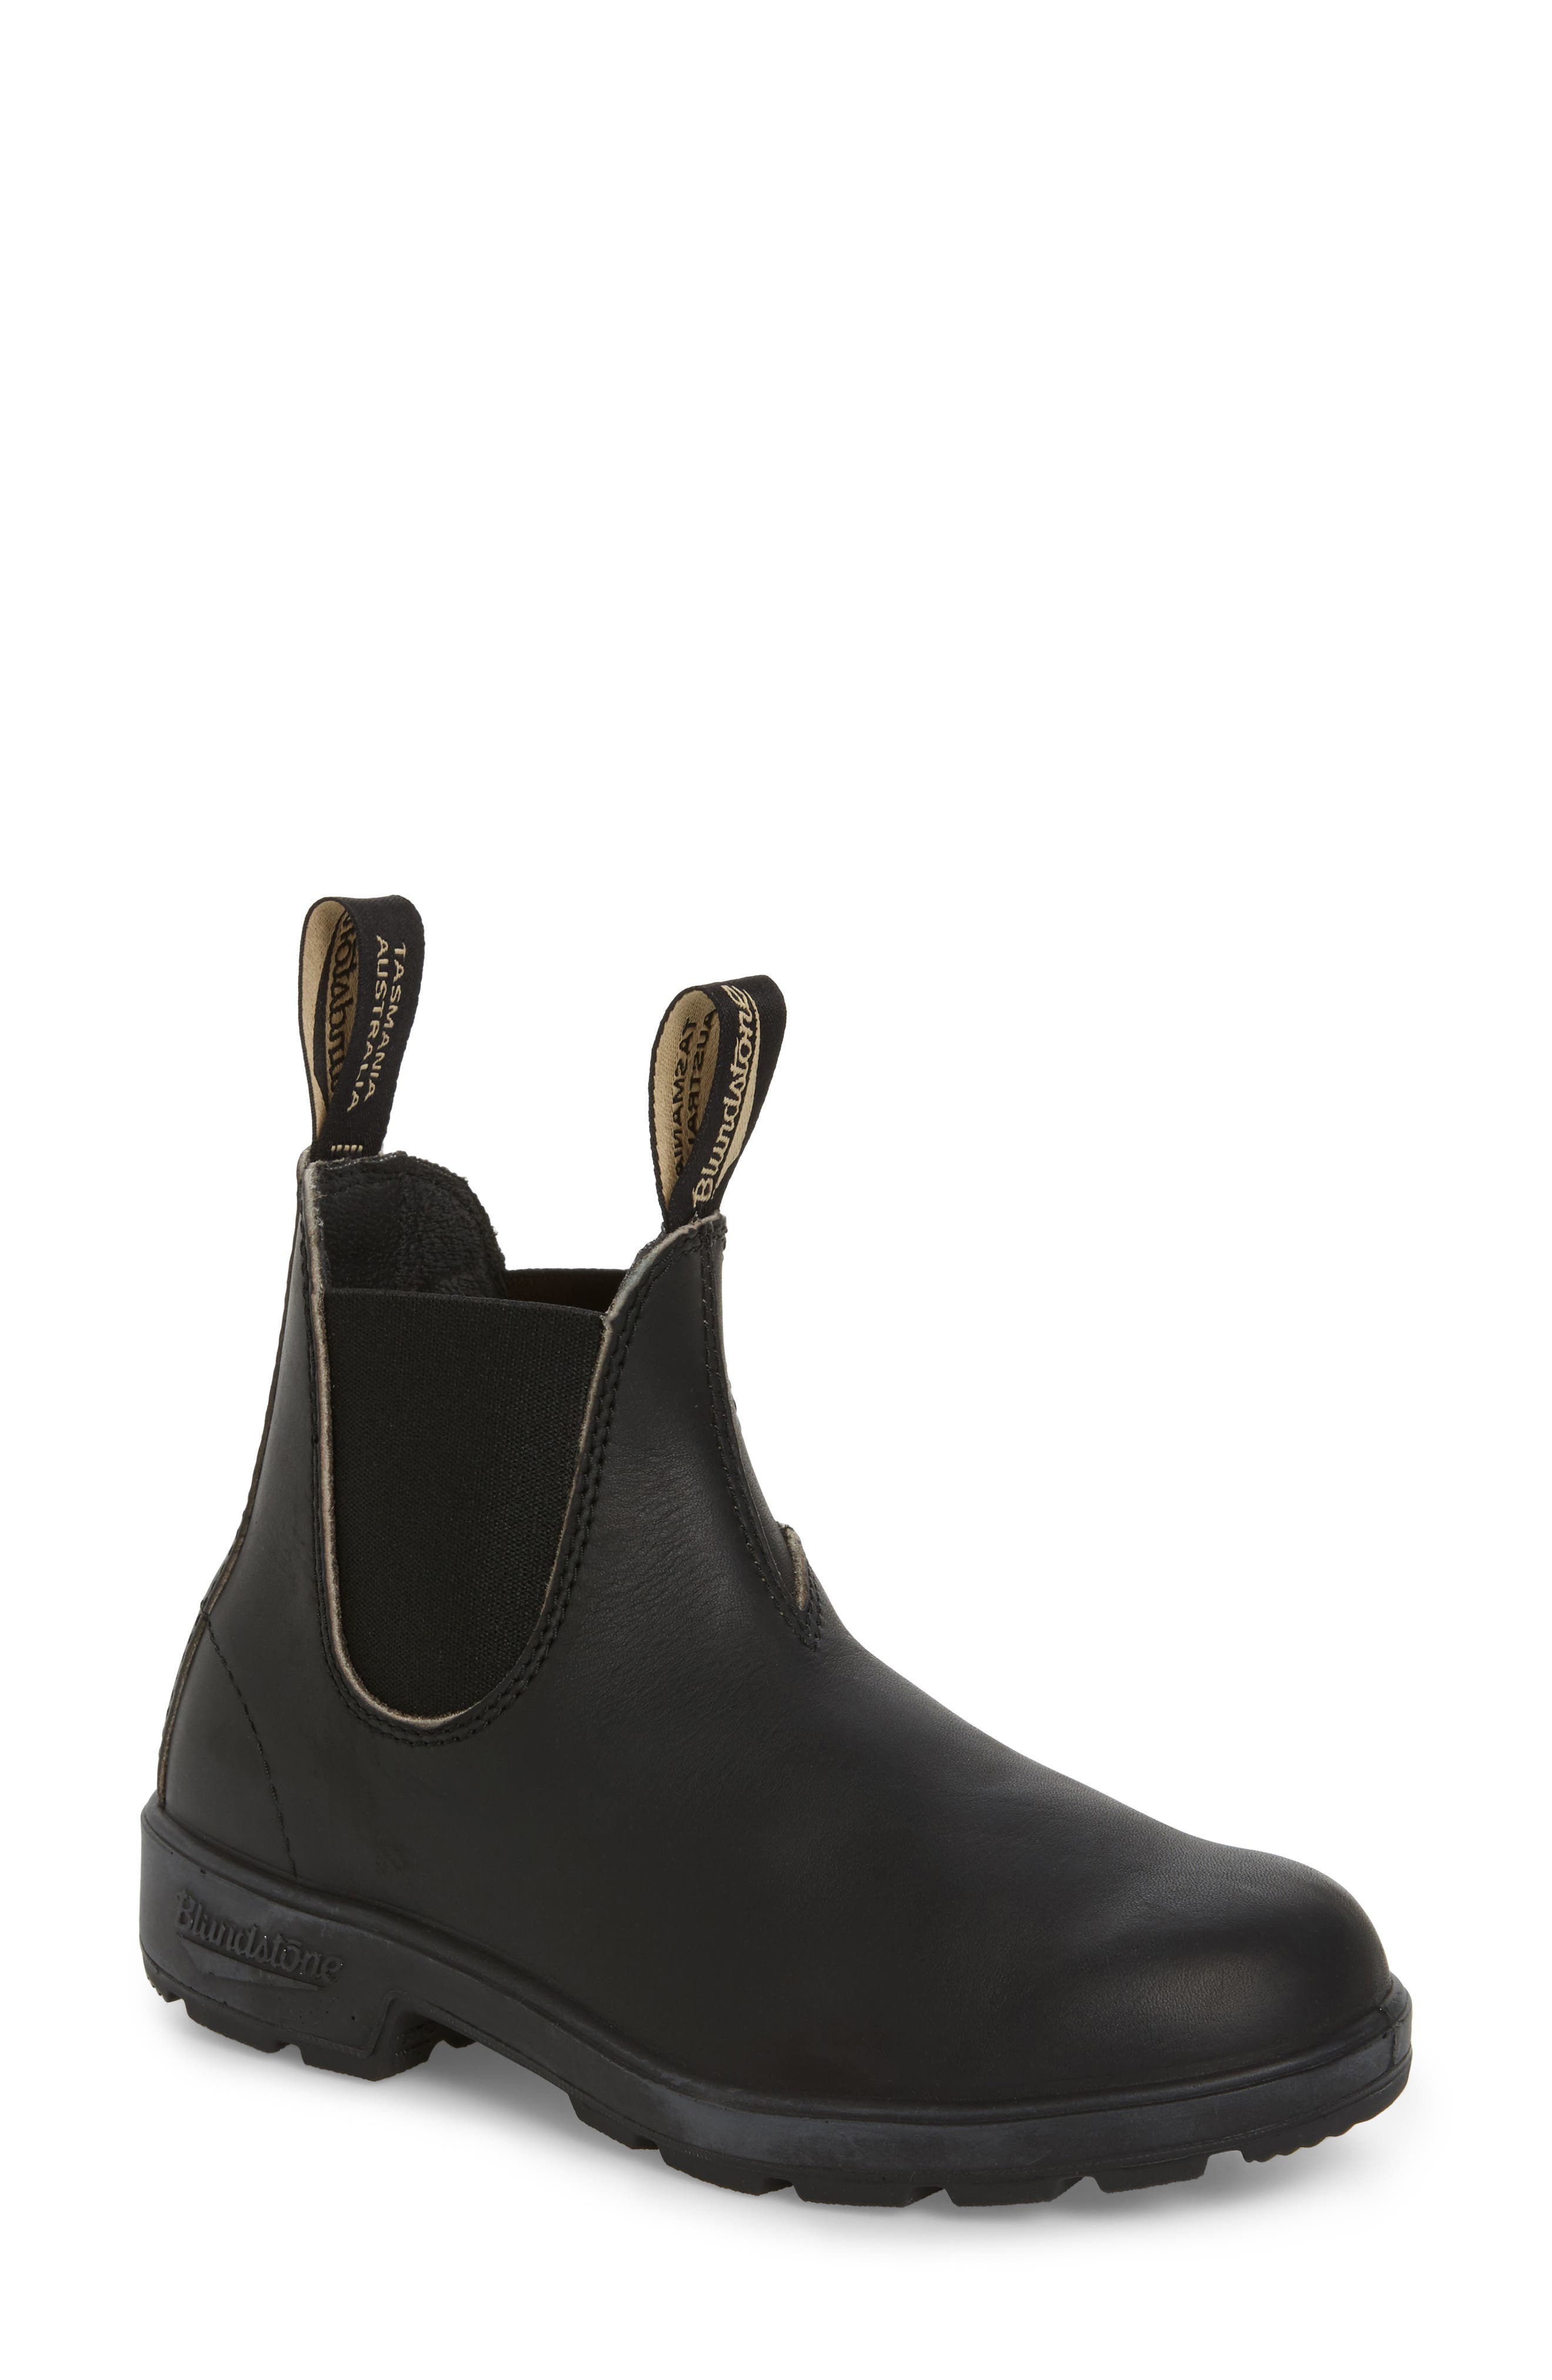 where to buy blundstones near me